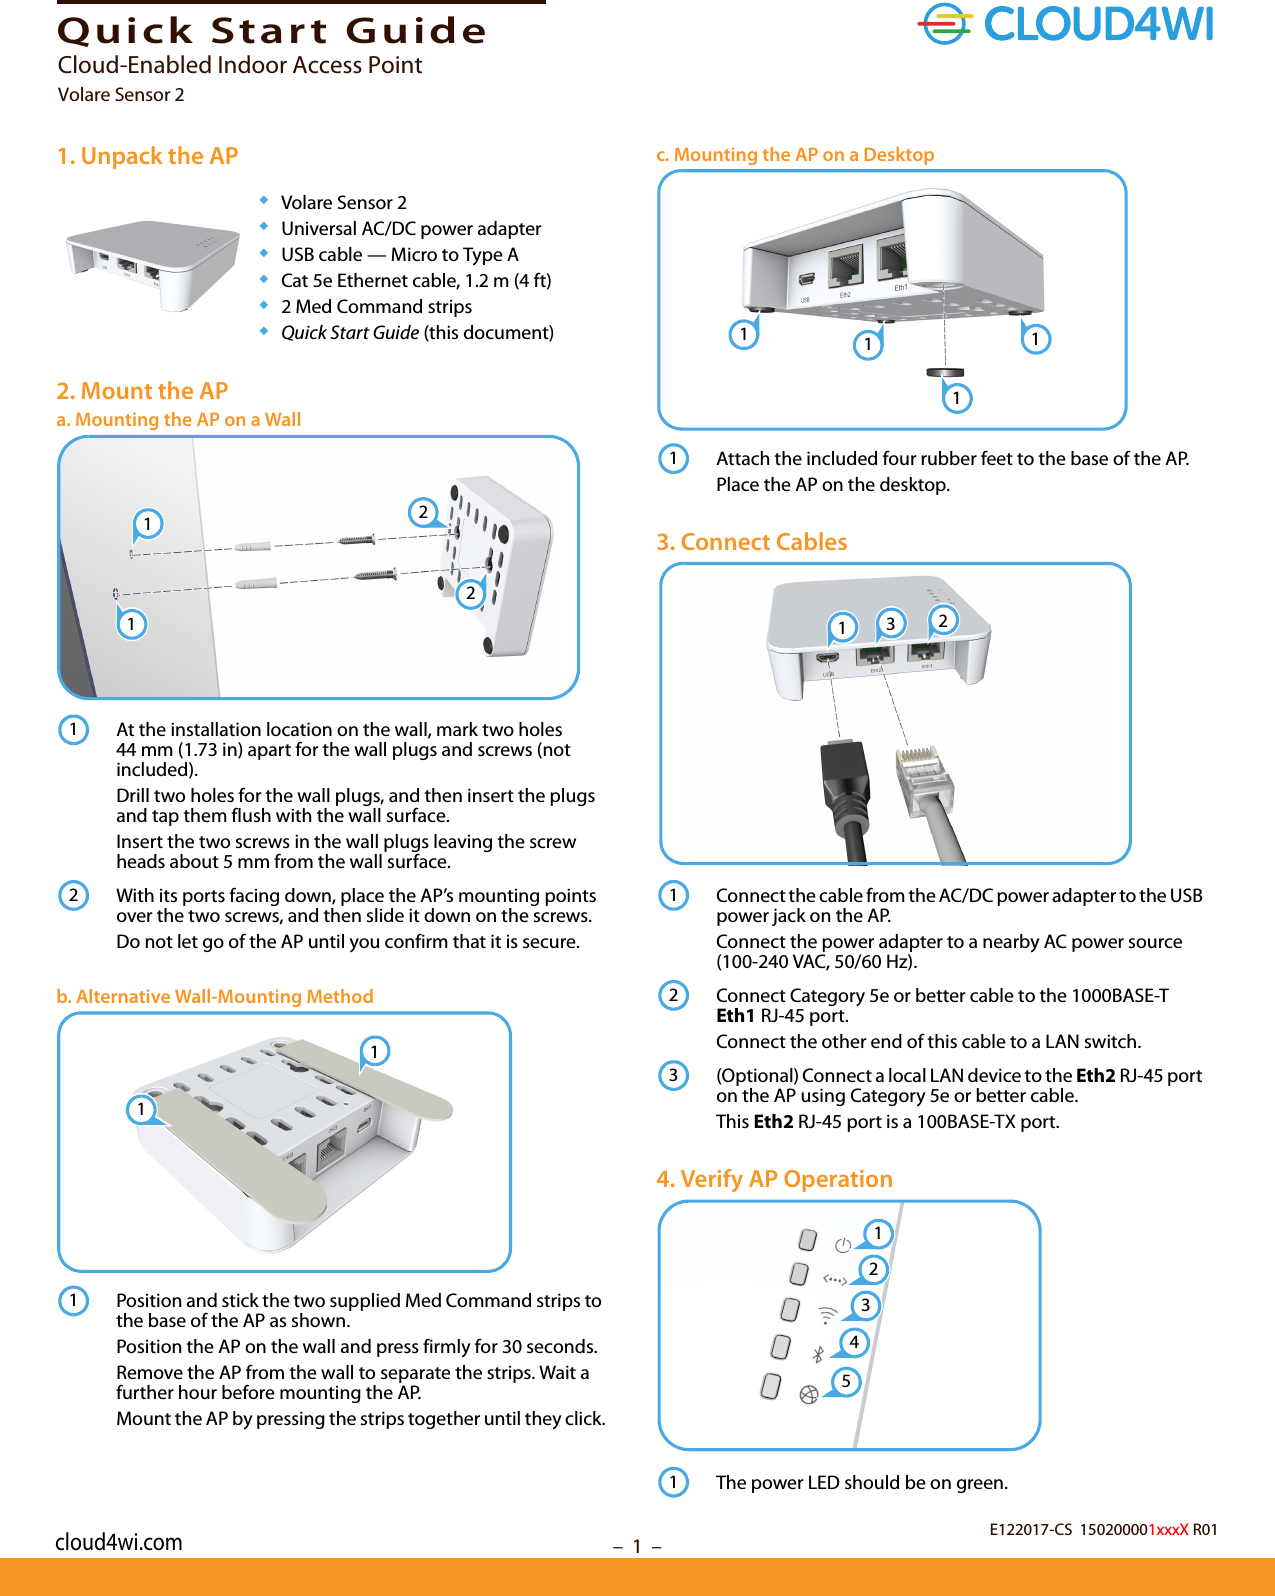 –  1  –Quick Start Guide1. Unpack the AP◆Volare Sensor 2◆Universal AC/DC power adapter◆USB cable — Micro to Type A◆Cat 5e Ethernet cable, 1.2 m (4 ft)◆2 Med Command strips◆Quick Start Guide (this document)2. Mount the APa. Mounting the AP on a WallAt the installation location on the wall, mark two holes 44 mm (1.73 in) apart for the wall plugs and screws (not included).Drill two holes for the wall plugs, and then insert the plugs and tap them flush with the wall surface. Insert the two screws in the wall plugs leaving the screw heads about 5 mm from the wall surface.With its ports facing down, place the AP’s mounting points over the two screws, and then slide it down on the screws.Do not let go of the AP until you confirm that it is secure.b. Alternative Wall-Mounting MethodPosition and stick the two supplied Med Command strips to the base of the AP as shown.Position the AP on the wall and press firmly for 30 seconds.Remove the AP from the wall to separate the strips. Wait a further hour before mounting the AP.Mount the AP by pressing the strips together until they click.122112111c. Mounting the AP on a DesktopAttach the included four rubber feet to the base of the AP.Place the AP on the desktop.3. Connect CablesConnect the cable from the AC/DC power adapter to the USB power jack on the AP.Connect the power adapter to a nearby AC power source (100-240 VAC, 50/60 Hz).Connect Category 5e or better cable to the 1000BASE-T Eth1 RJ-45 port.Connect the other end of this cable to a LAN switch.(Optional) Connect a local LAN device to the Eth2 RJ-45 port on the AP using Category 5e or better cable.This Eth2 RJ-45 port is a 100BASE-TX port.4. Verify AP OperationThe power LED should be on green.11111312123124351E122017-CS  150200001xxxX R01Cloud-Enabled Indoor Access PointVolare Sensor 2cloud4wi.com